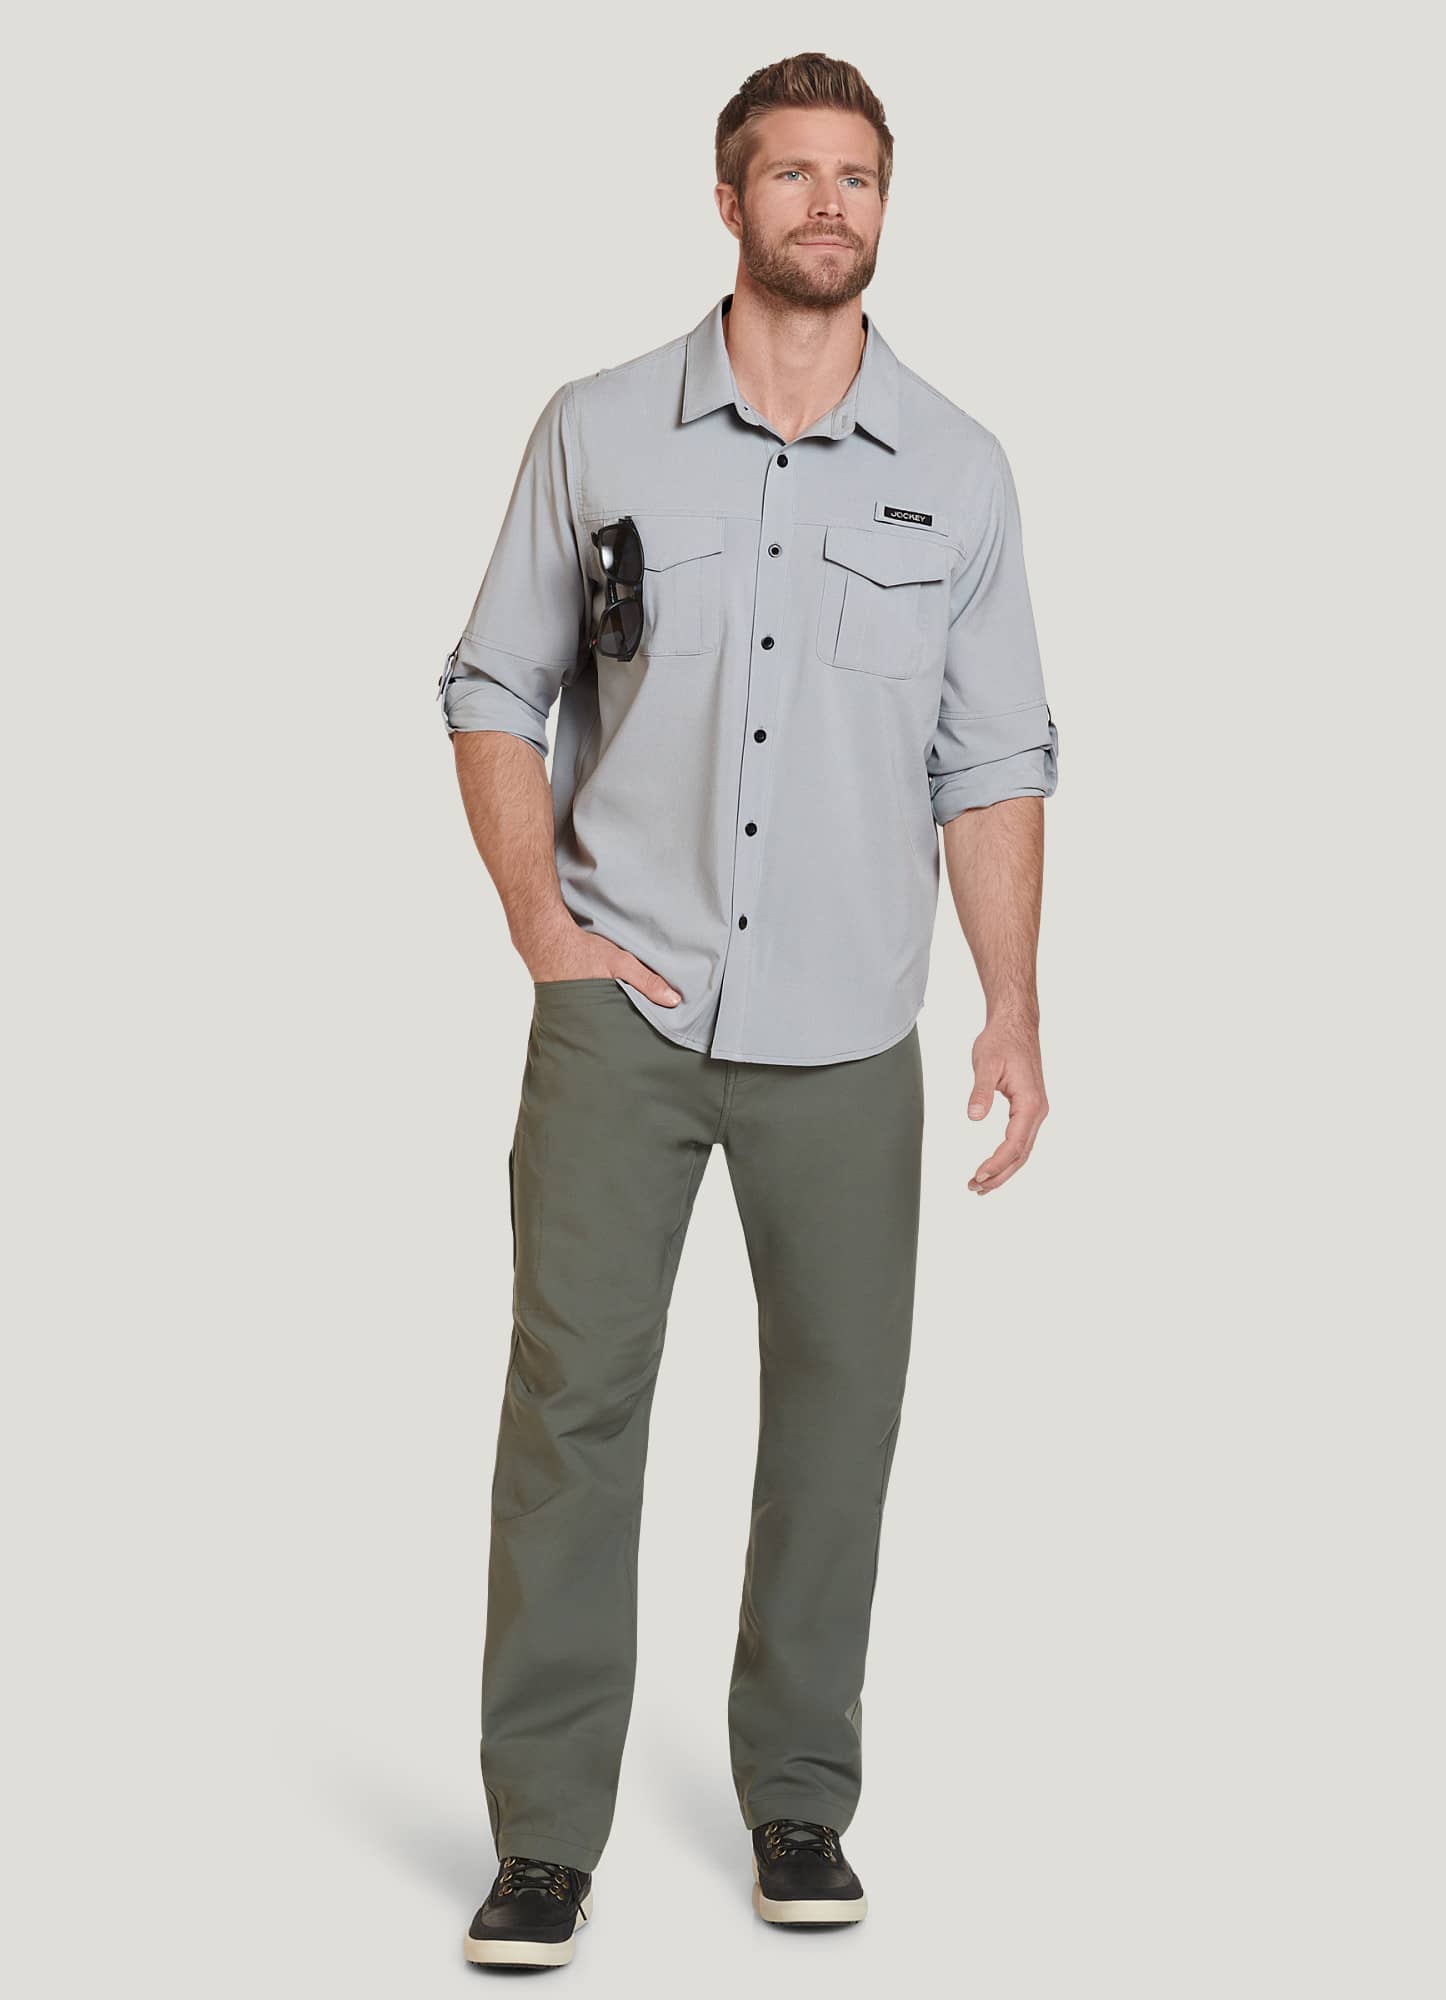 Men's 100% Cotton Fishing Shirts & Tops for sale